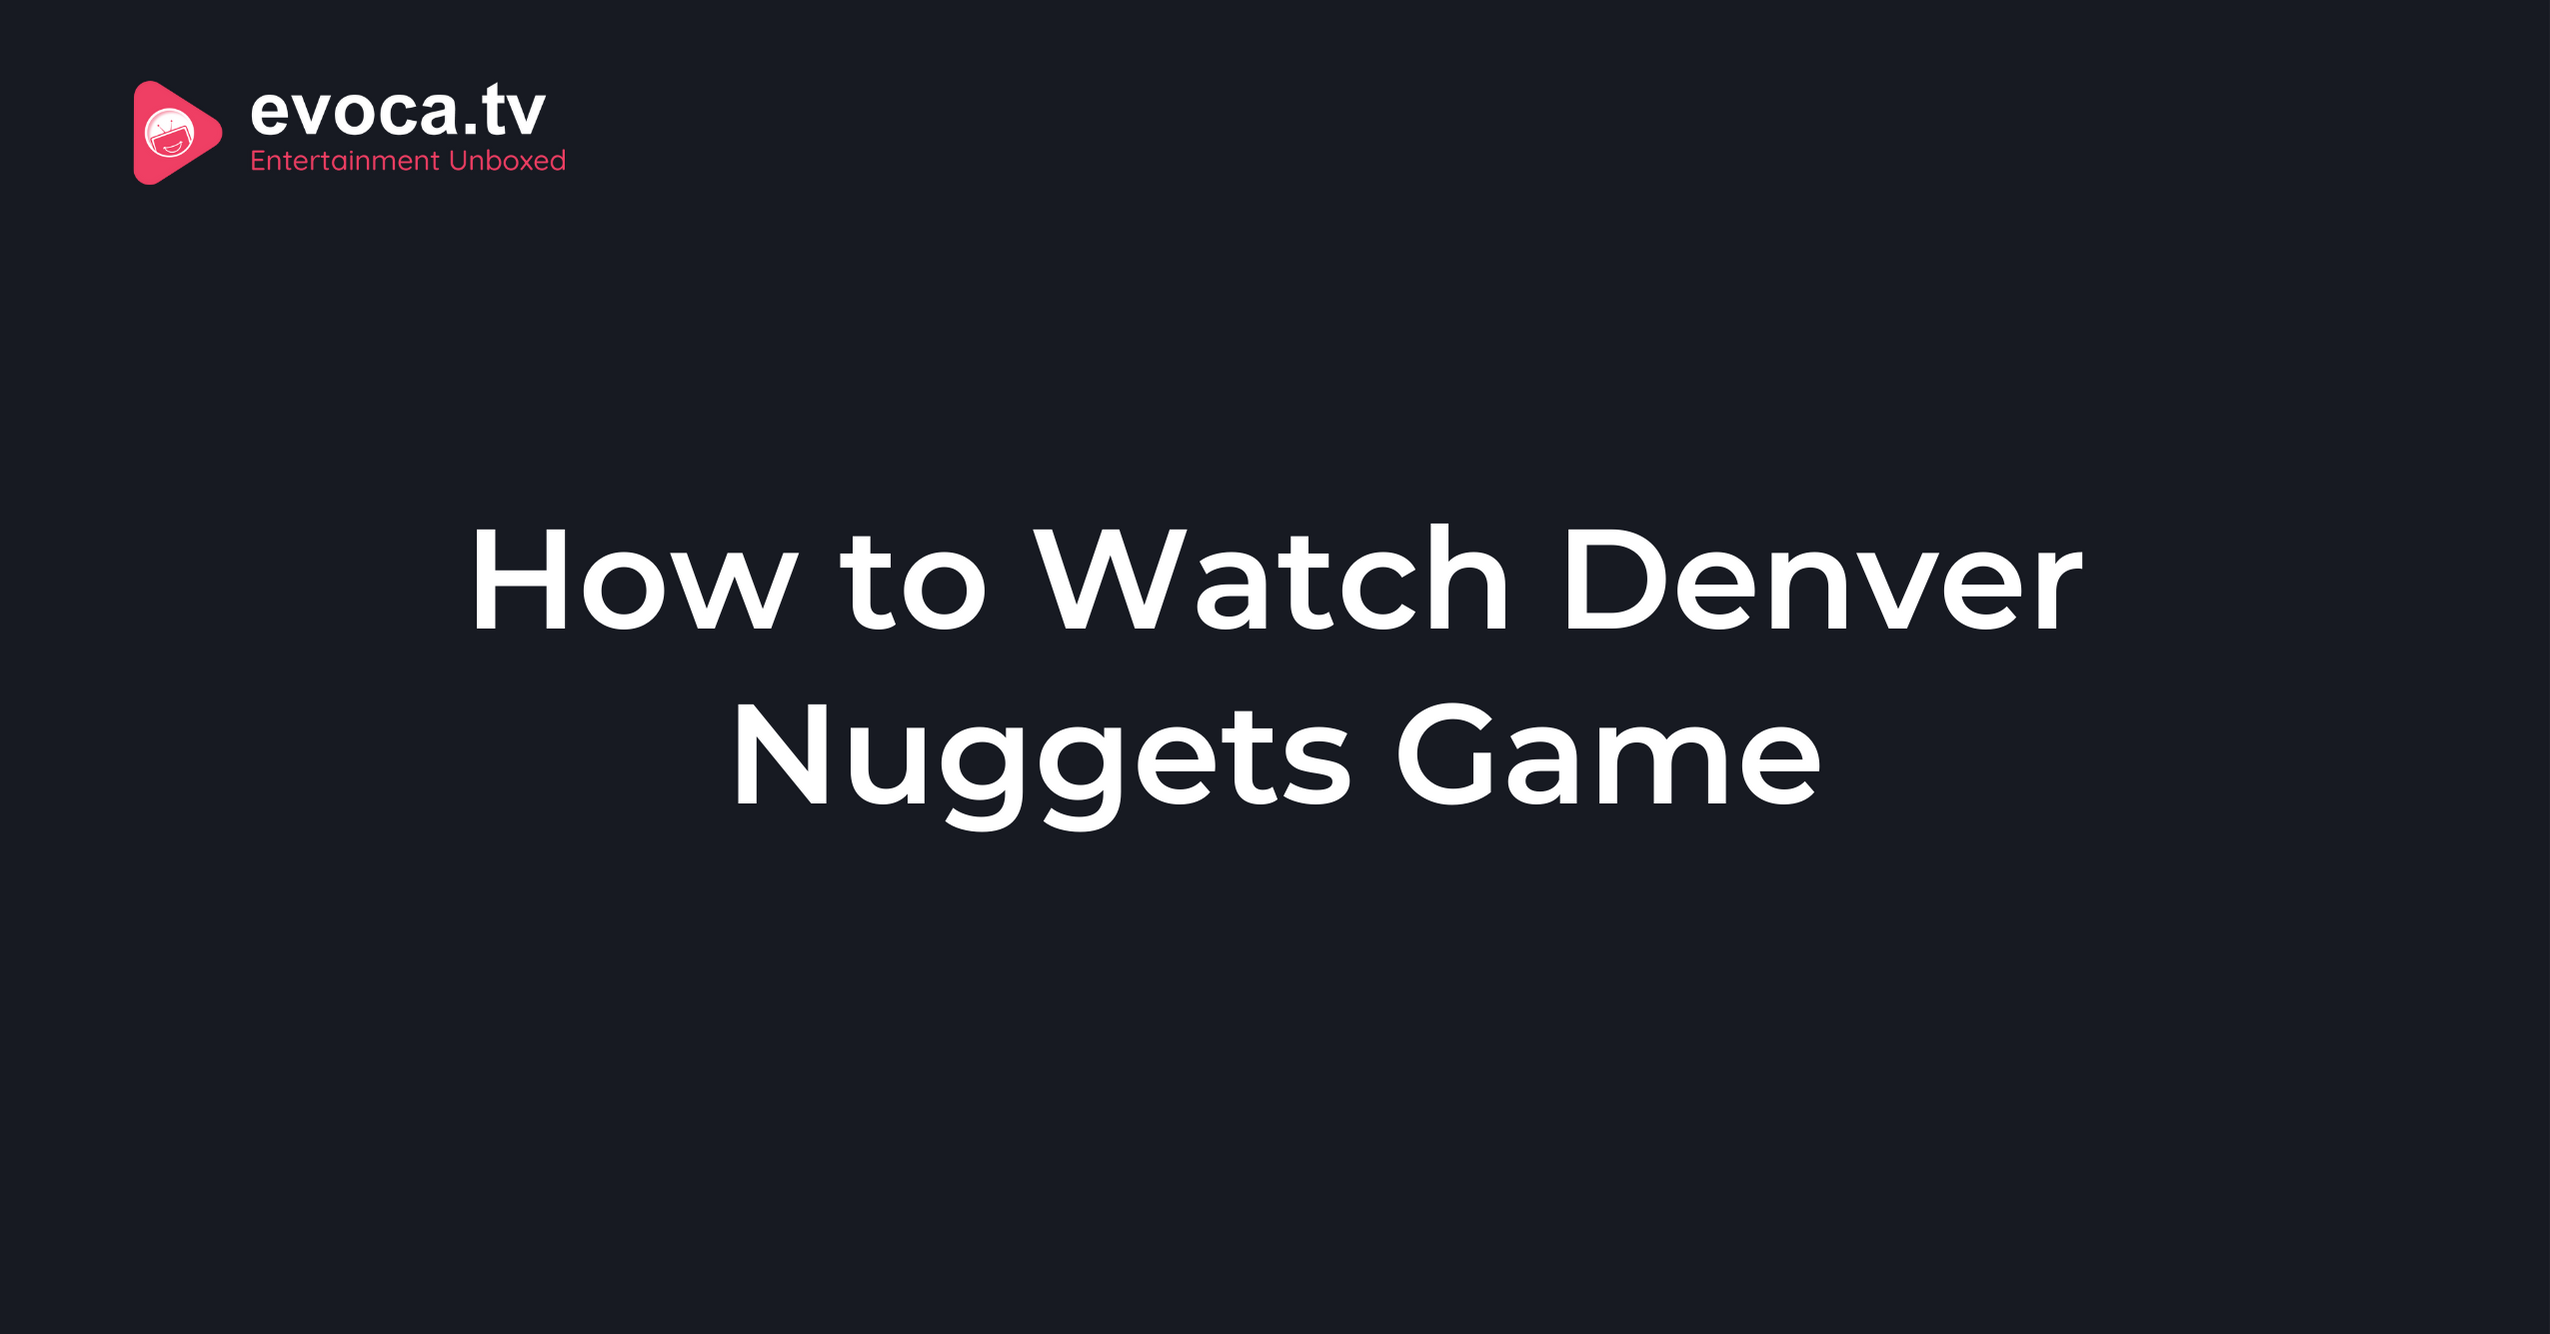 How to Watch Denver Nuggets Game